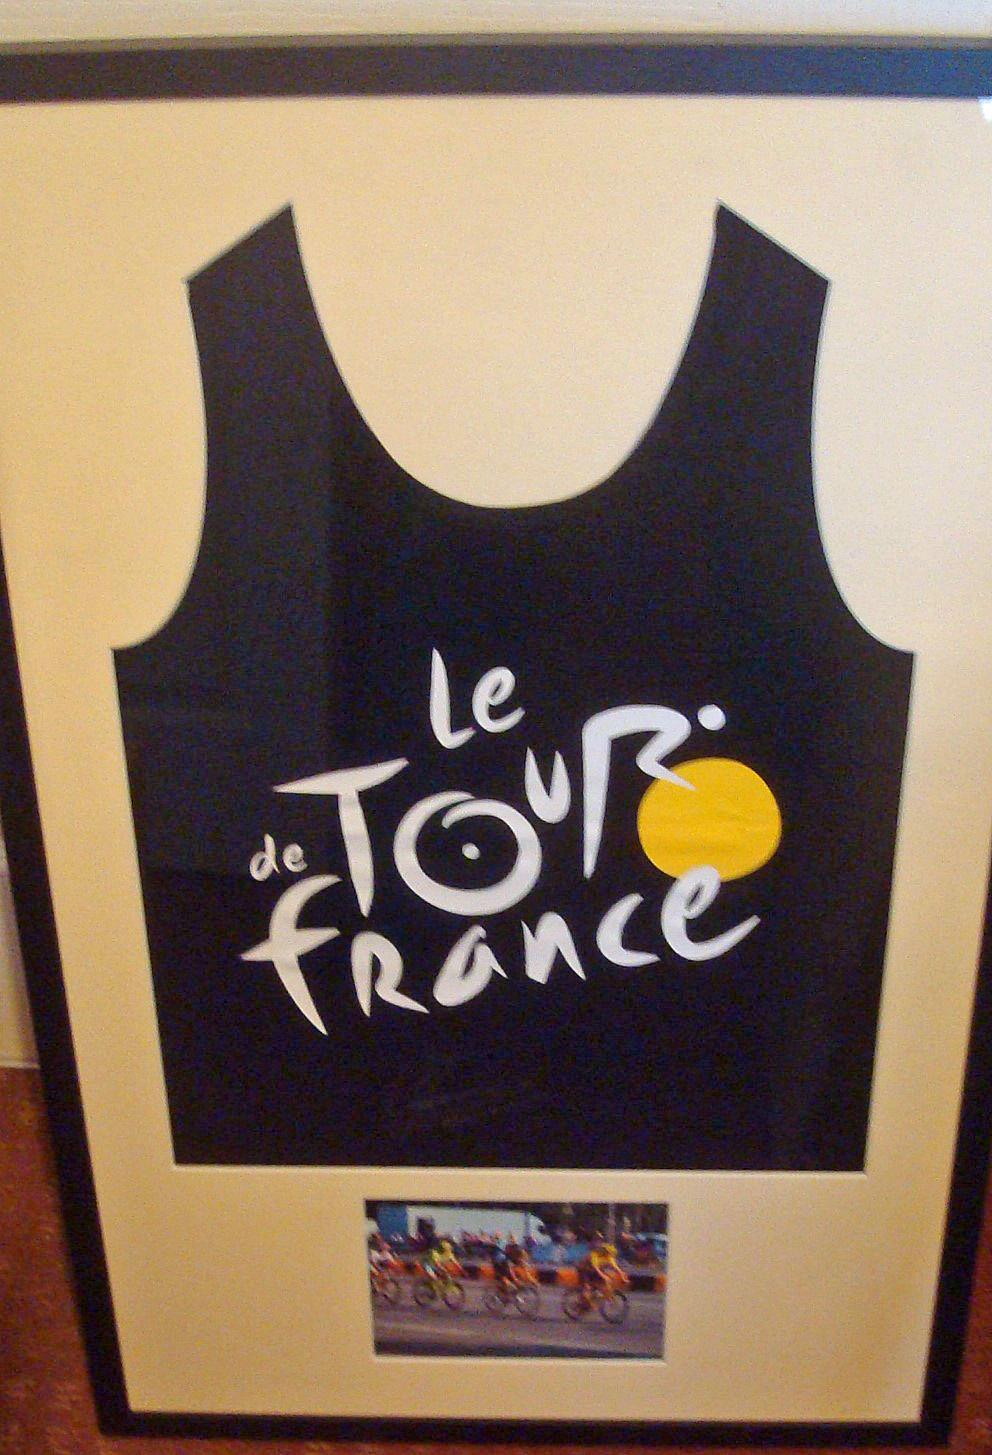 Cycling - Tour De France Winner Chris Froome Signed Shirt - Black shirt signed to bottom framed - Image 3 of 3